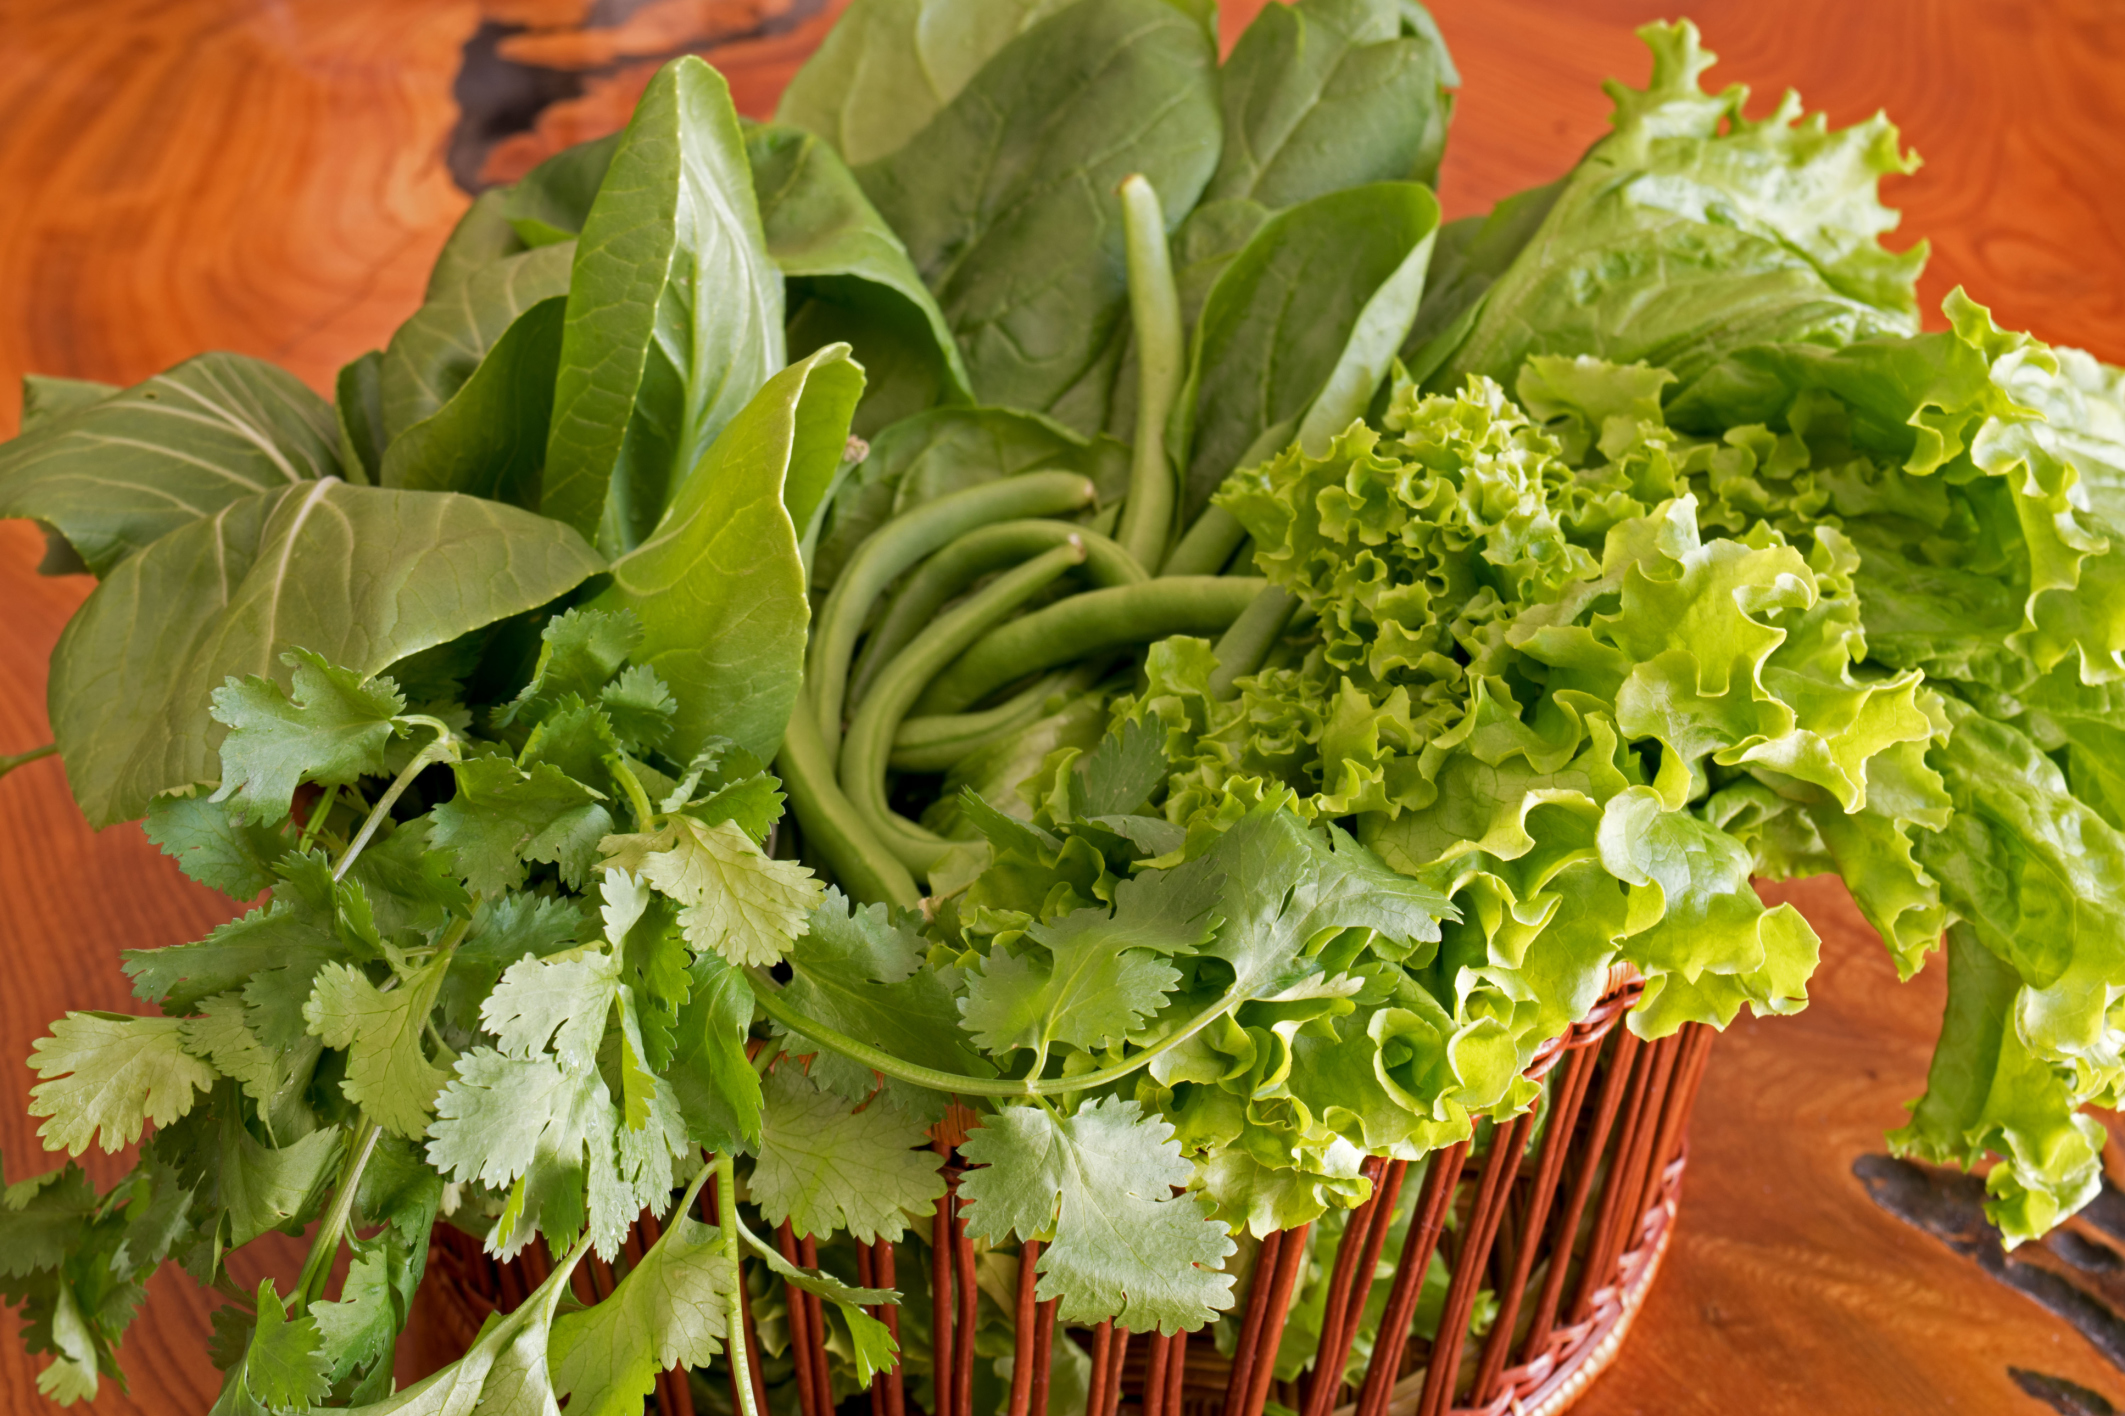 Green Leafy Vegetables can help Improve Vision